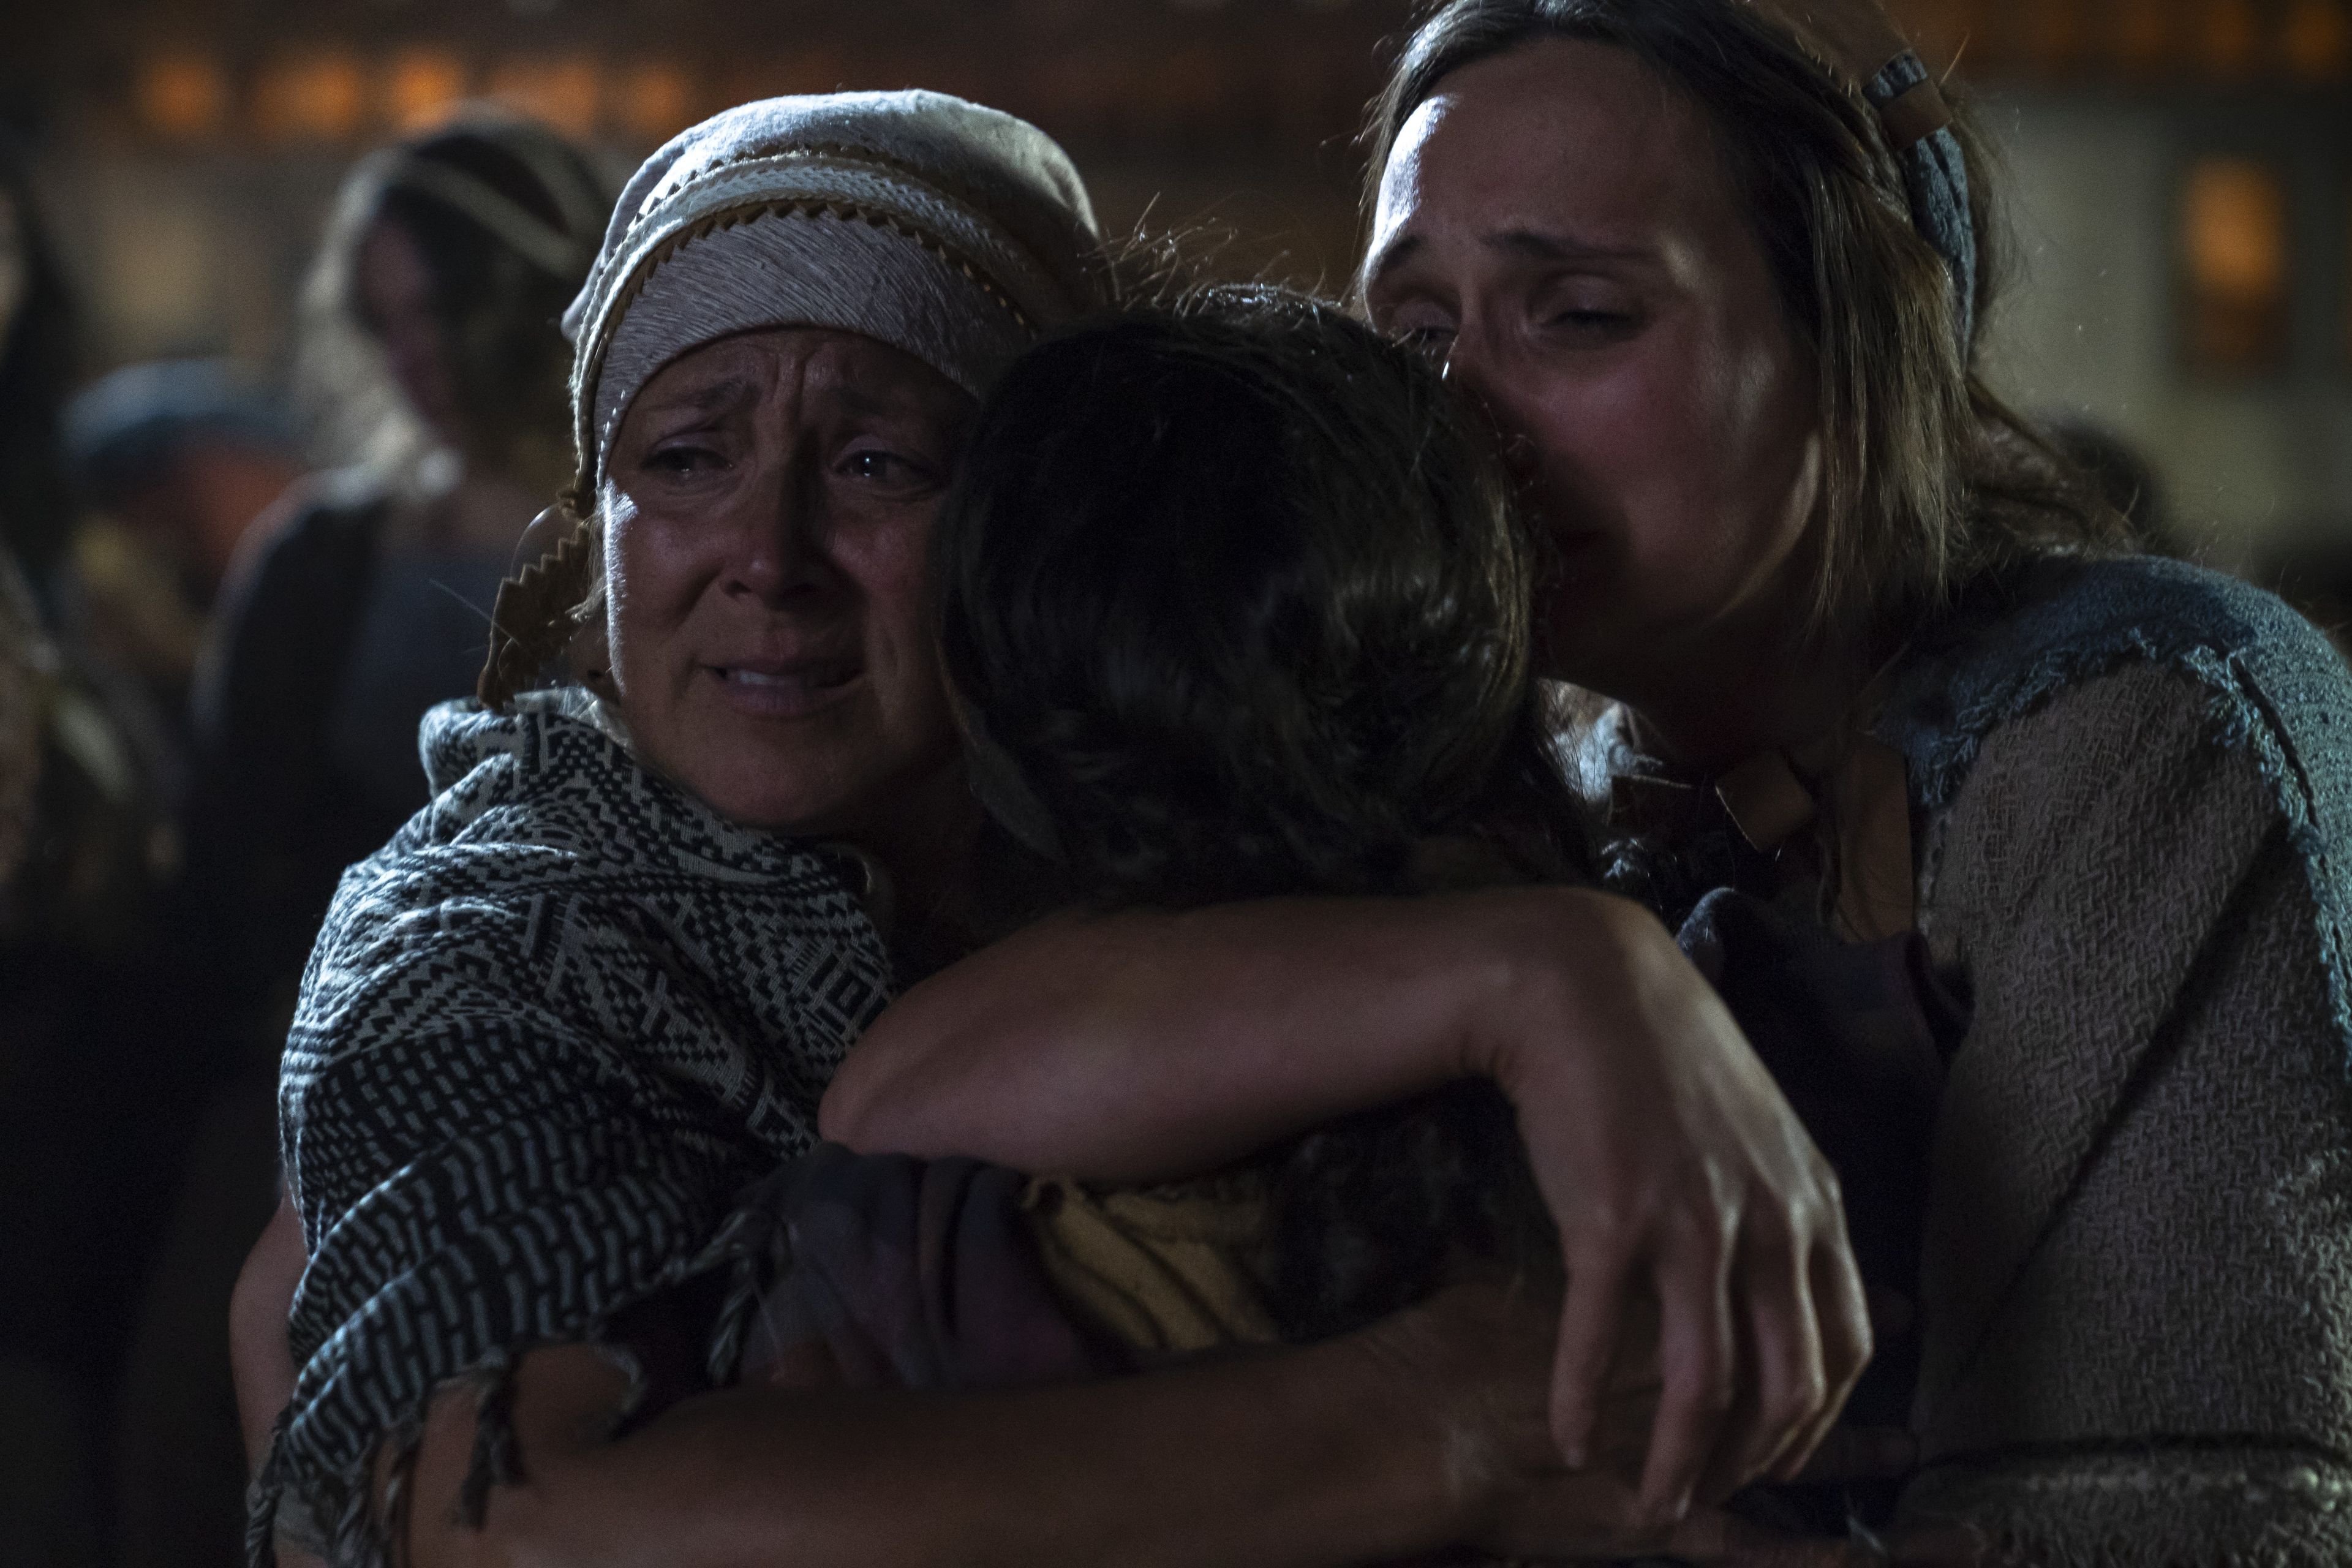 Ishmael's wife and her daughter say goodbye as they prepare to flee.